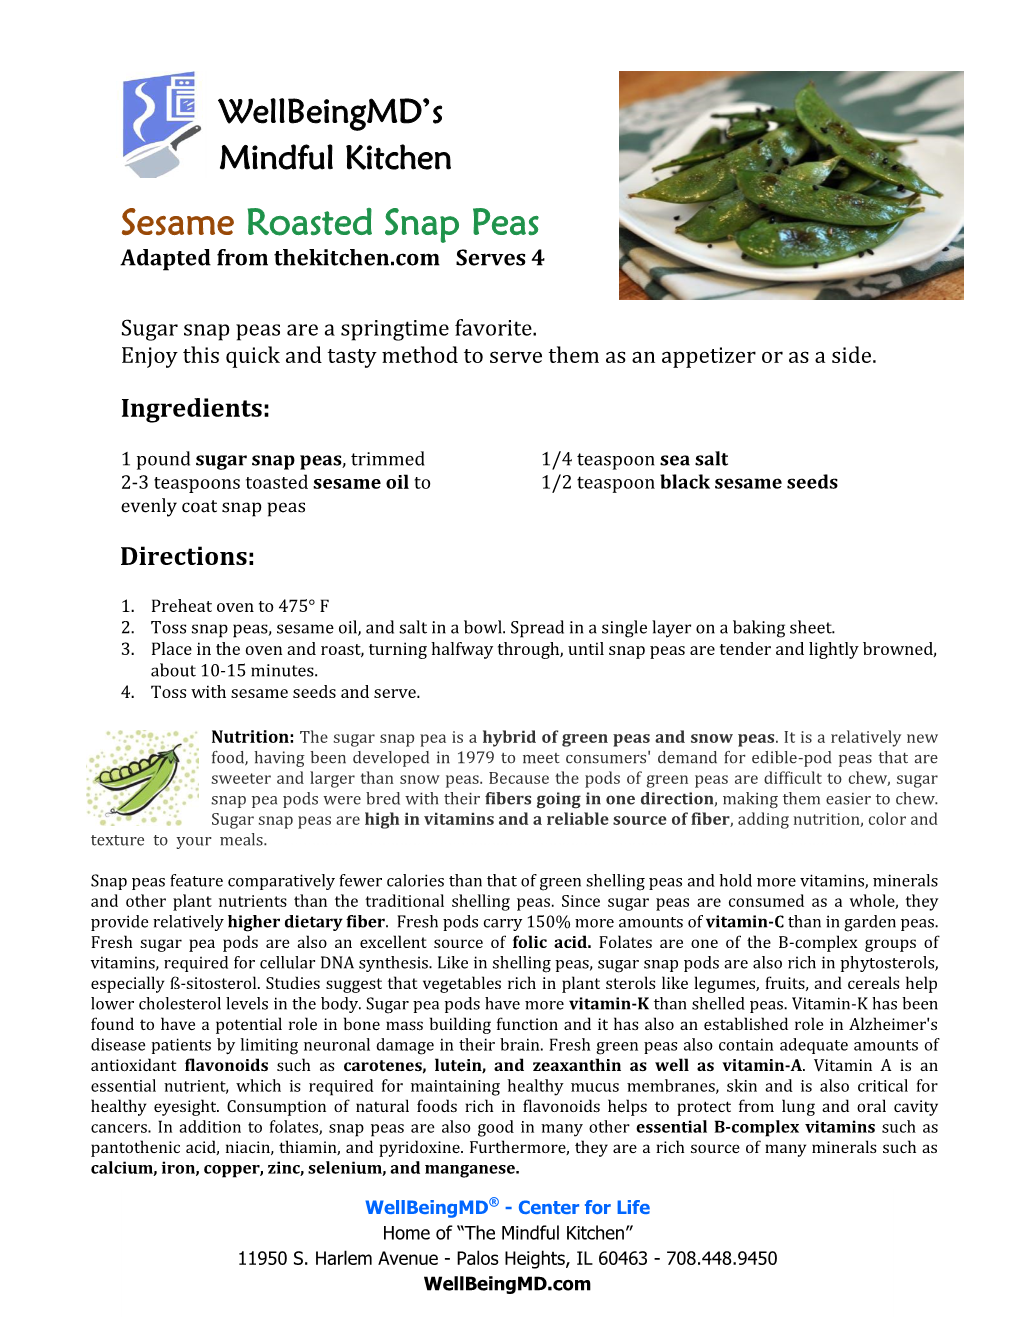 Sesame Roasted Snap Peas Adapted from Thekitchen.Com Serves 4